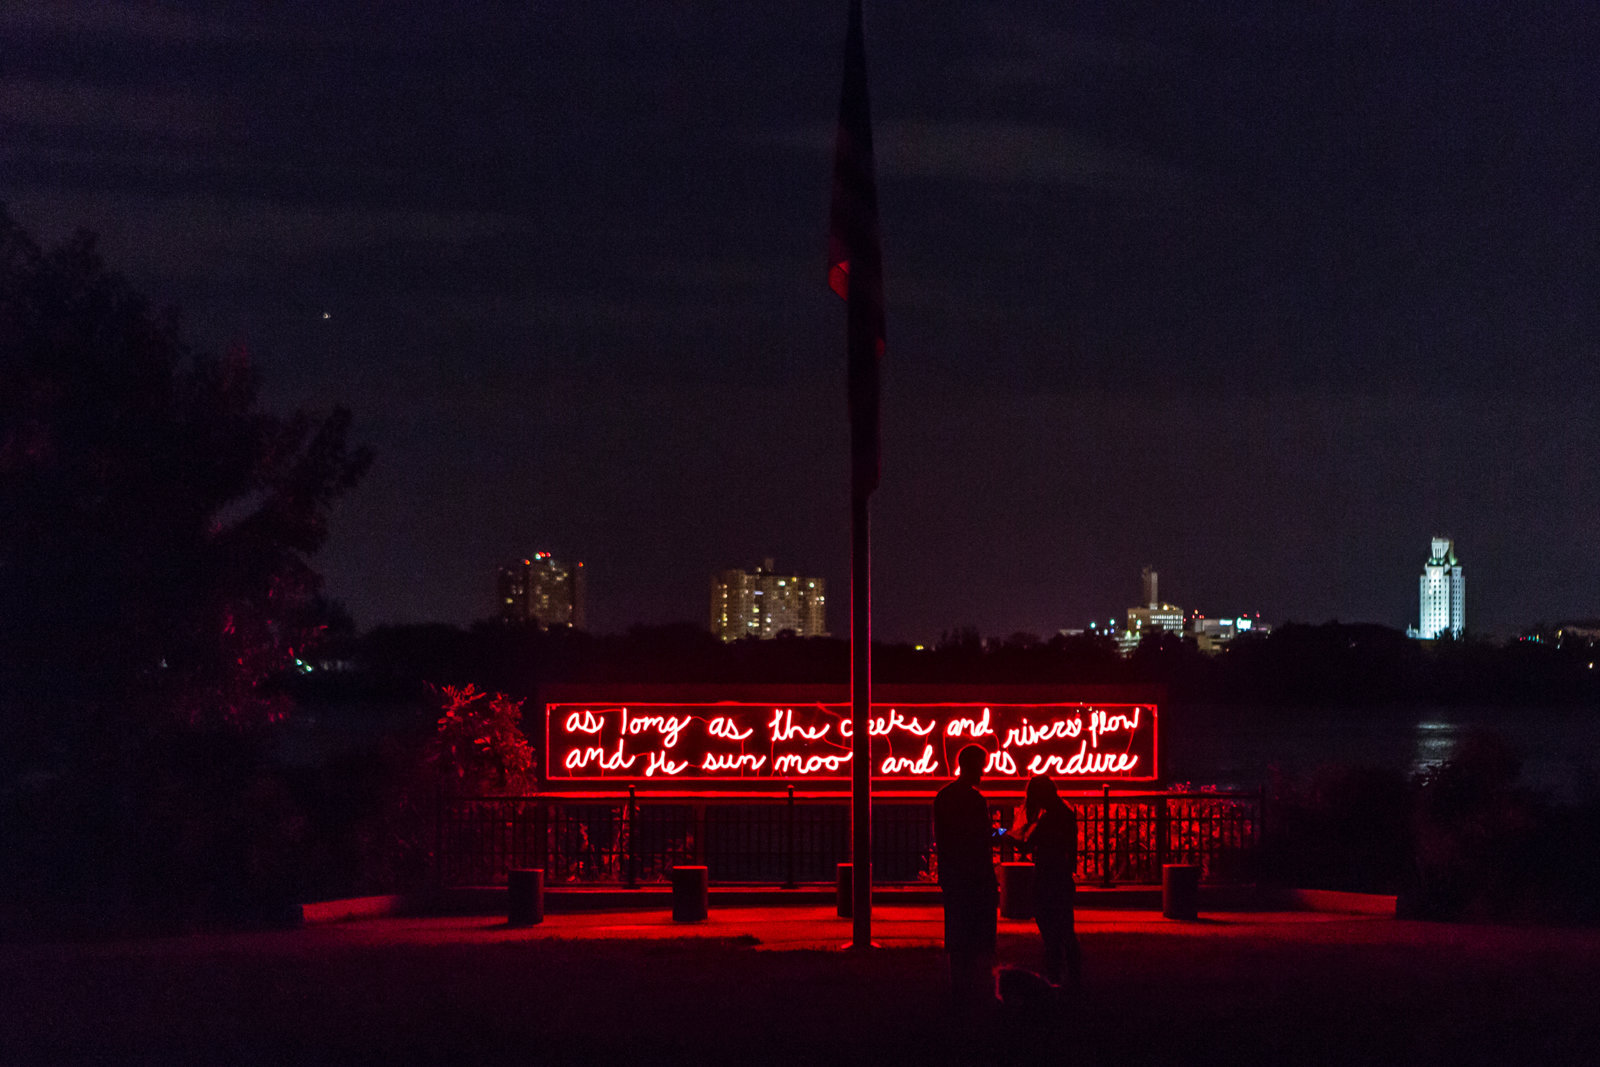 Duane Linklater, In Perpetuity, 2017, neon, transformers, aluminum, polycarbonate, and handwritten text by Sassa Linklater, 59 x 360 x 9 in. (150 x 914 x 23 cm). Installation view, Monument Lab: A Public Art and History Project, Mural Arts Philadelphia at Penn Treaty Park, Philadelphia, 2017